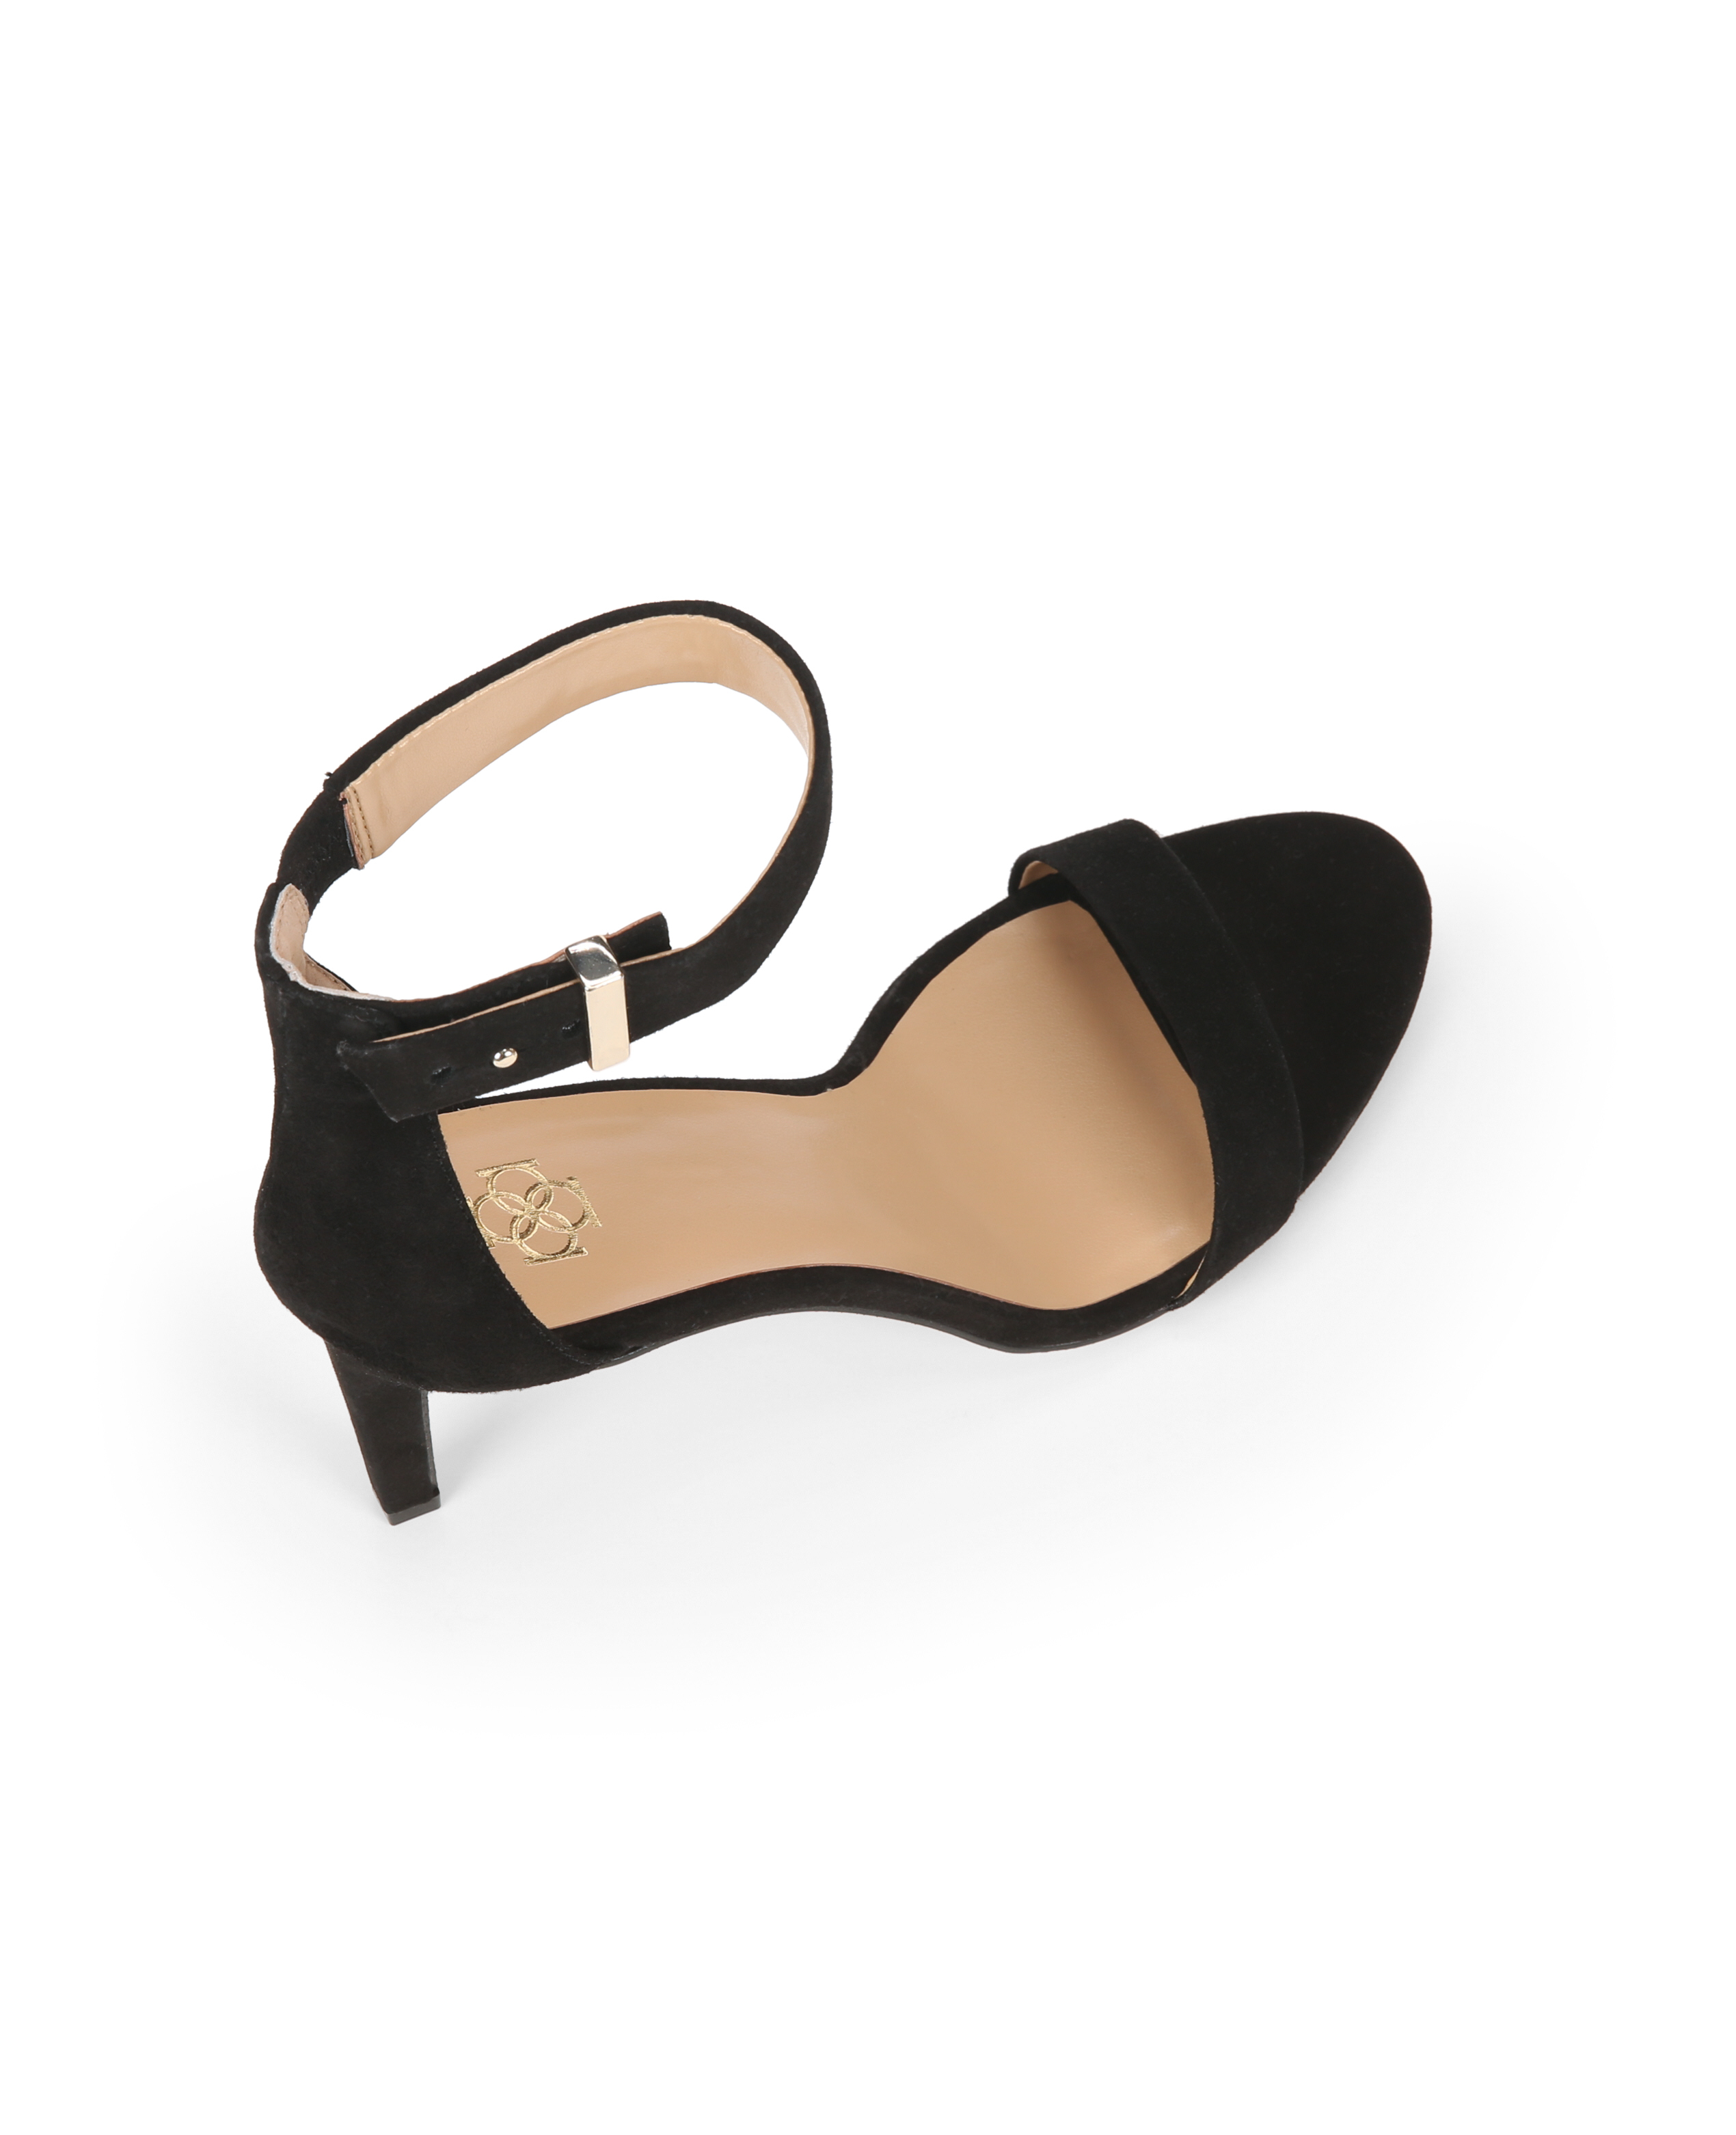 Ann Taylor Alaina Suede Ankle Strap 